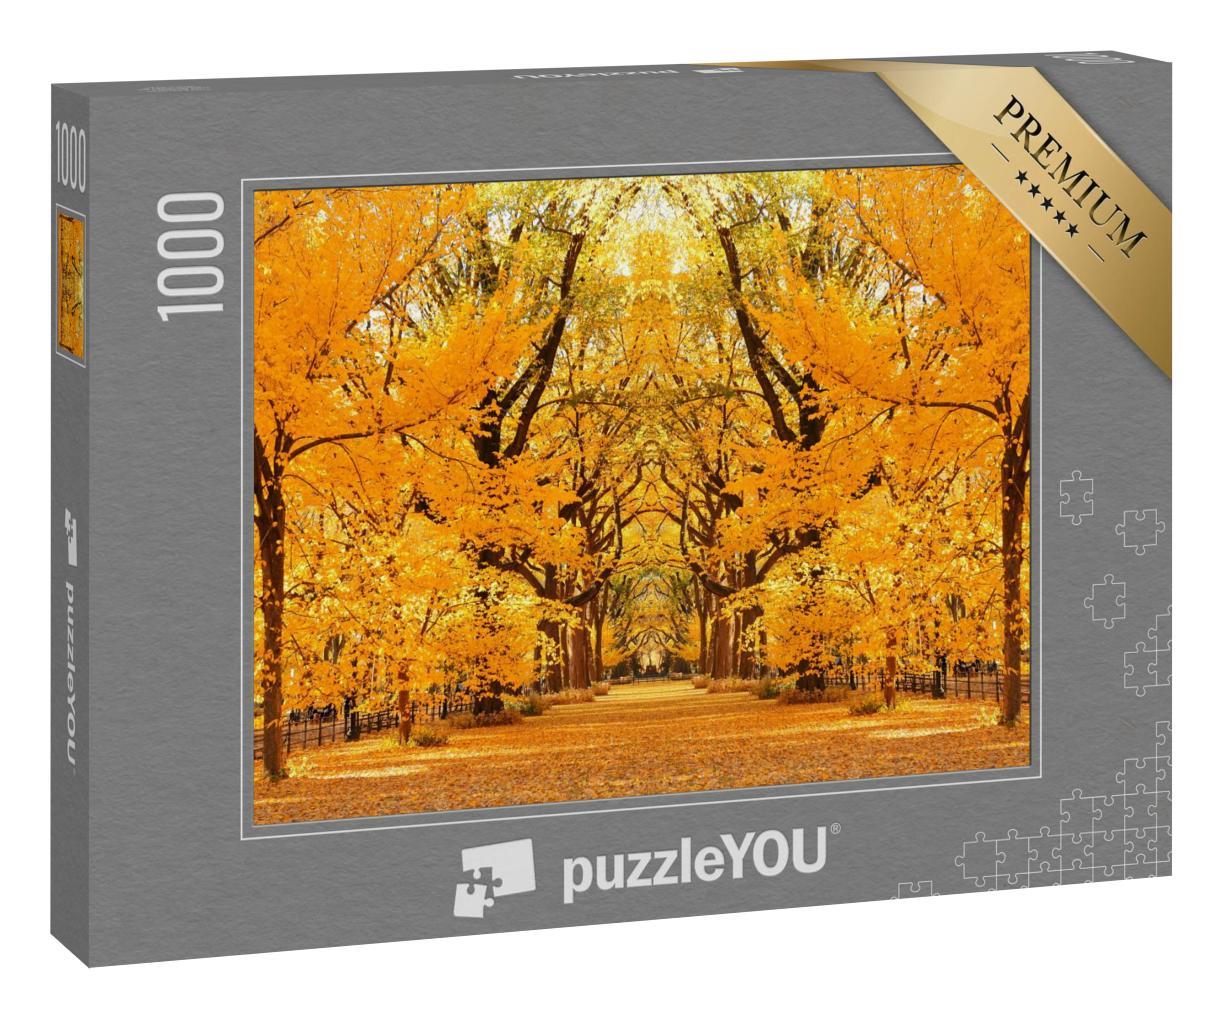 Puzzle 1000 Teile „Central Park Herbst in Midtown Manhattan New York City“